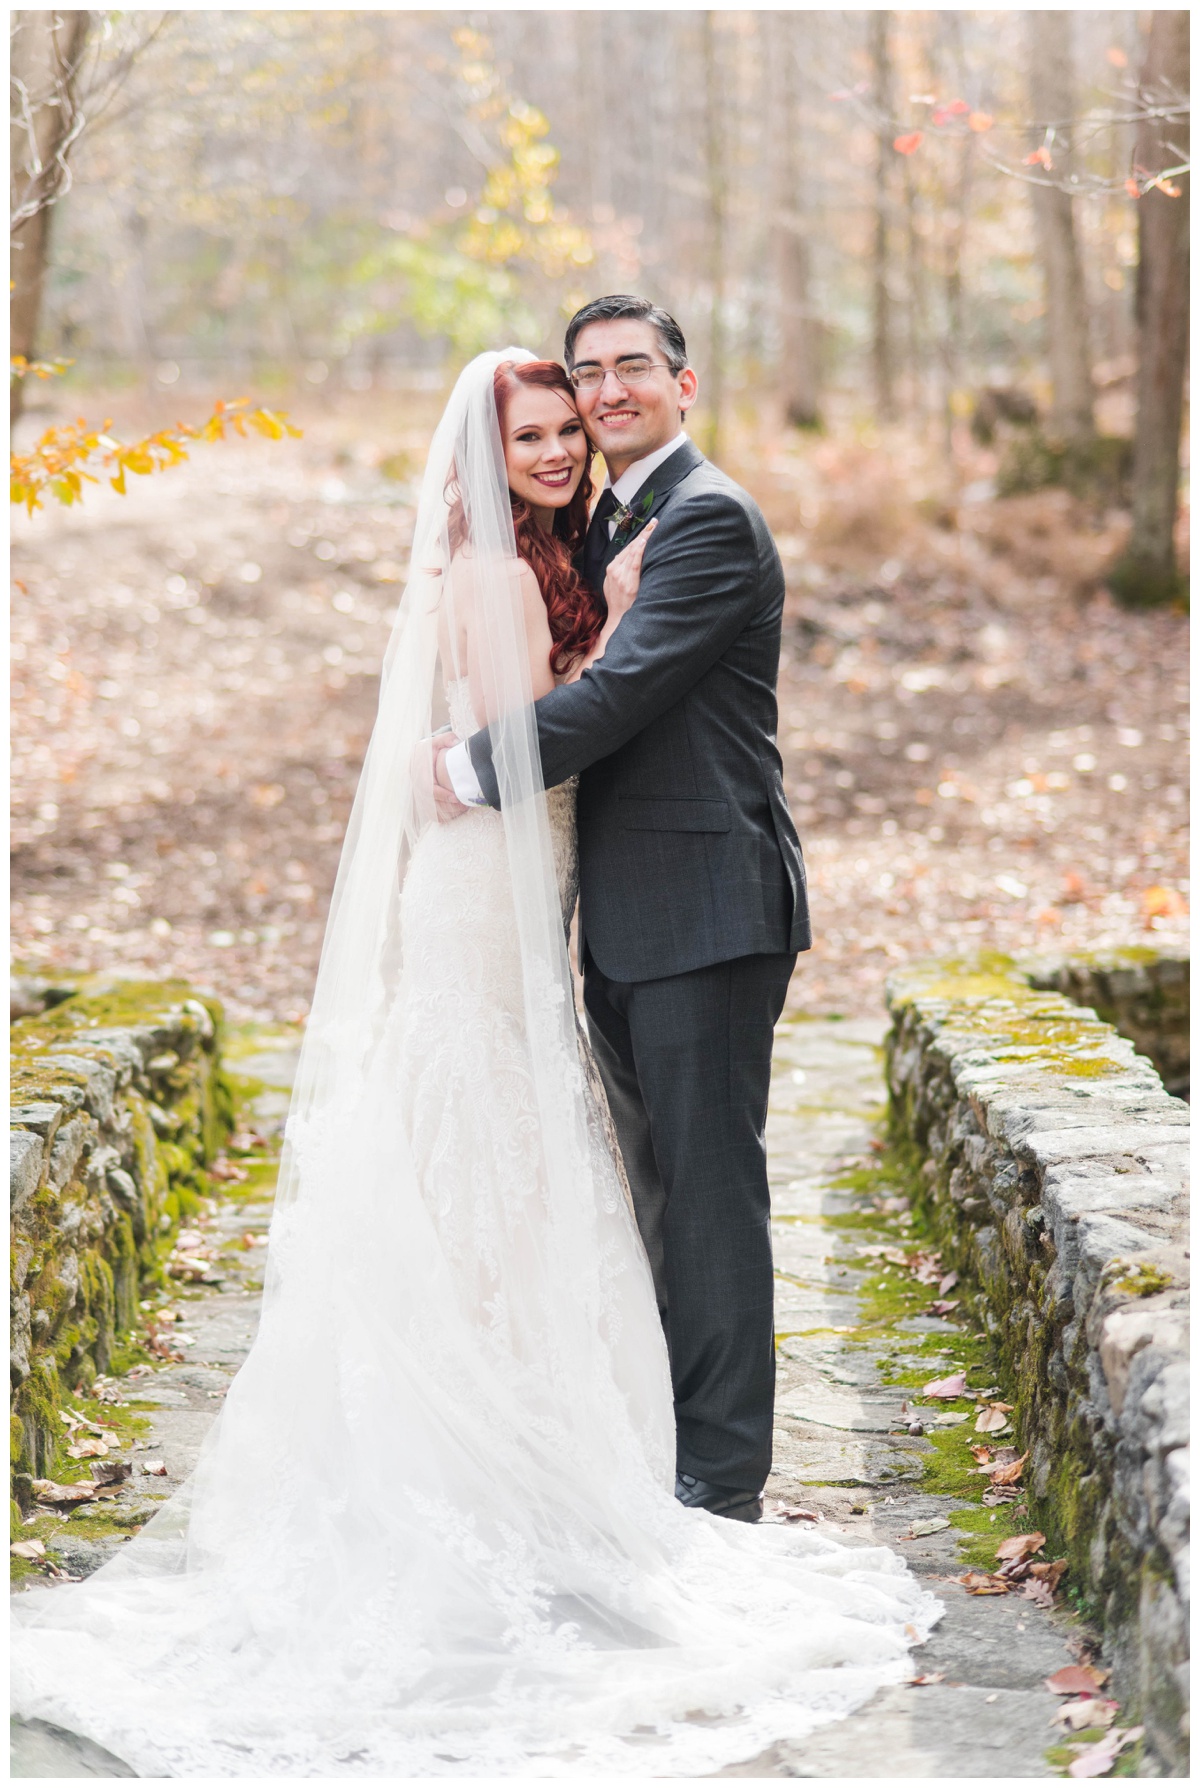 Whimsical Woodland Fall Wedding at mountain memories at thorpewood in thurmont maryland in october by sarah & dave photography richmond wedding photographer groom and bride first look photo inspiration purple tie charcoal gray black suit white wedding dress changing leaves bride and groom close and smiling moss covered stone bride yellow leaves fall wedding inspiration